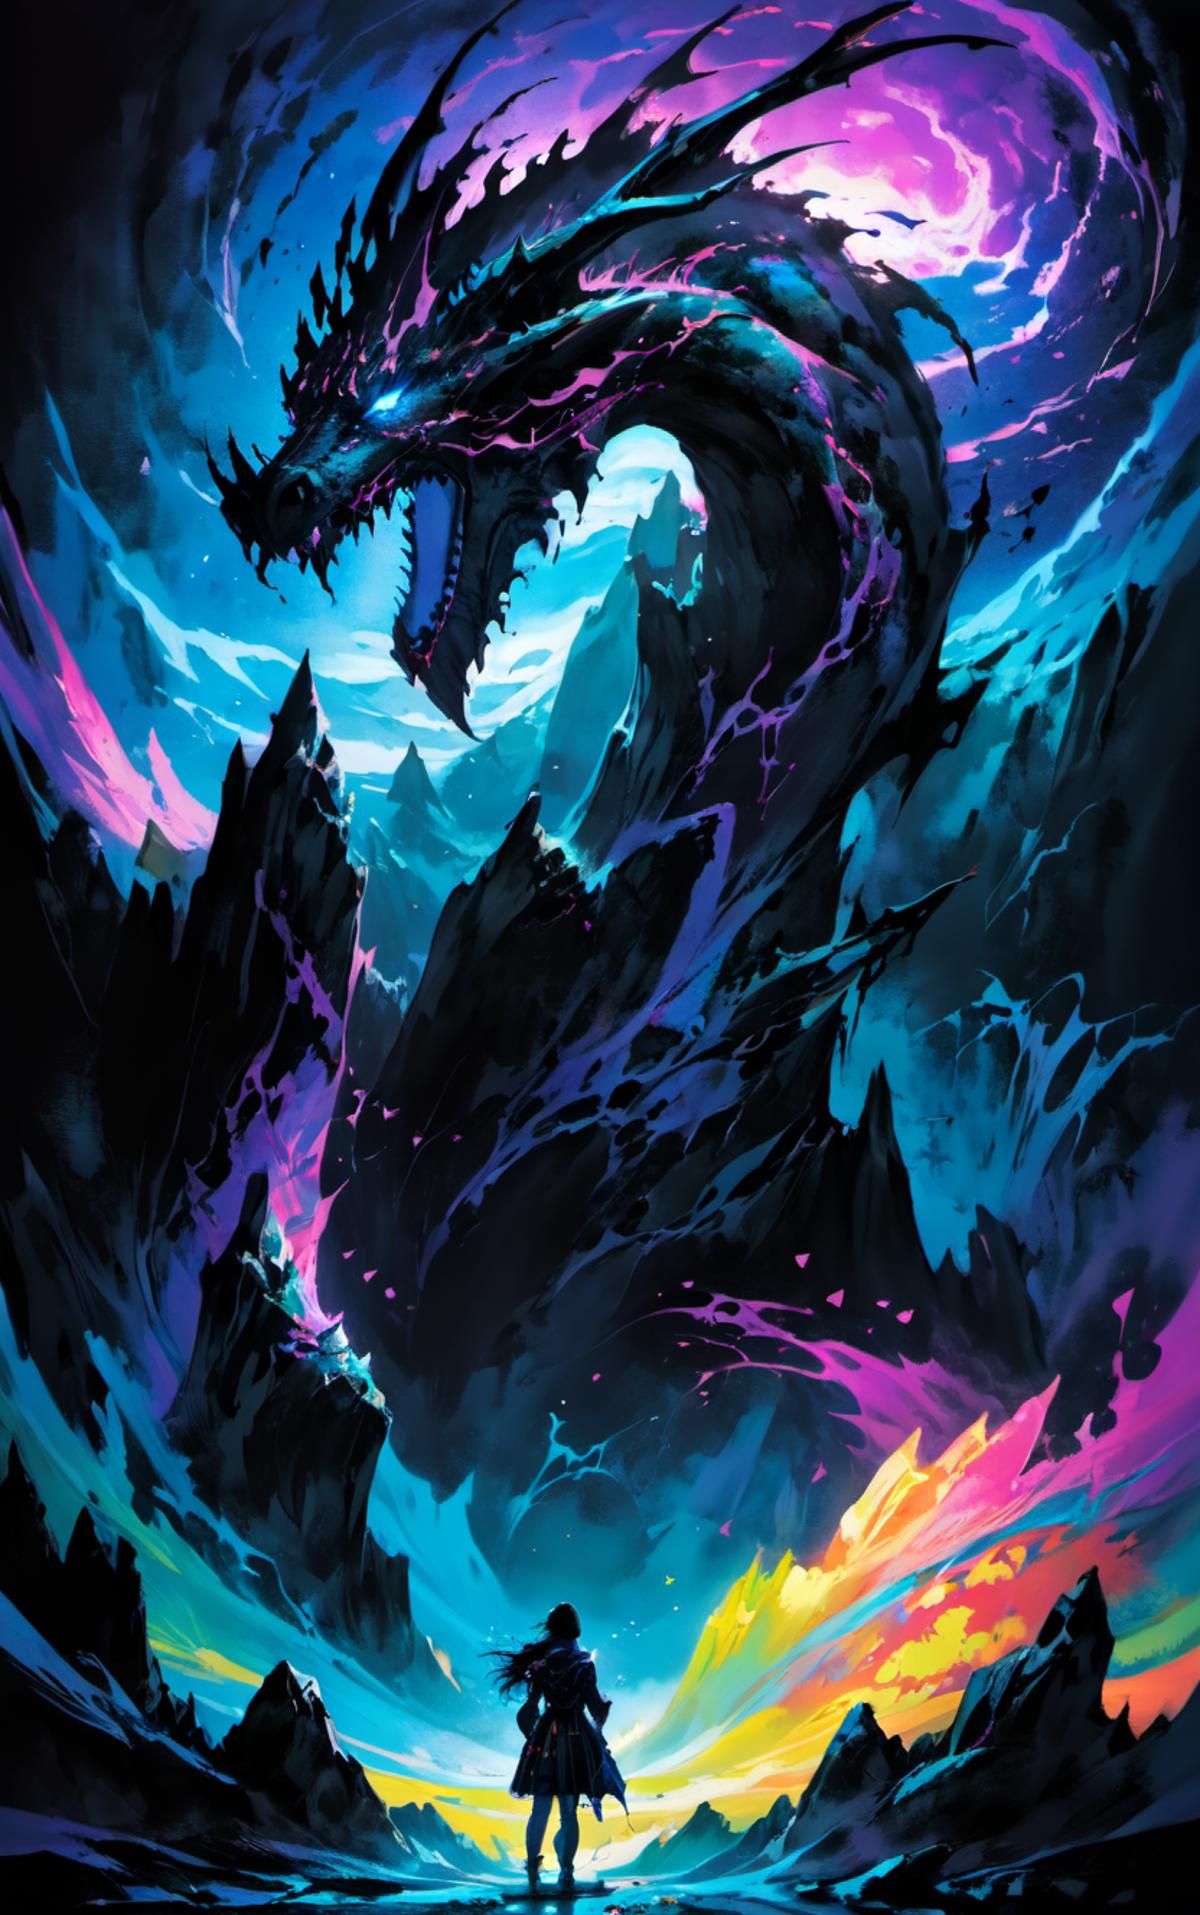 A large black dragon with blue eyes and purple and black scales, surrounded by a mountainous landscape.